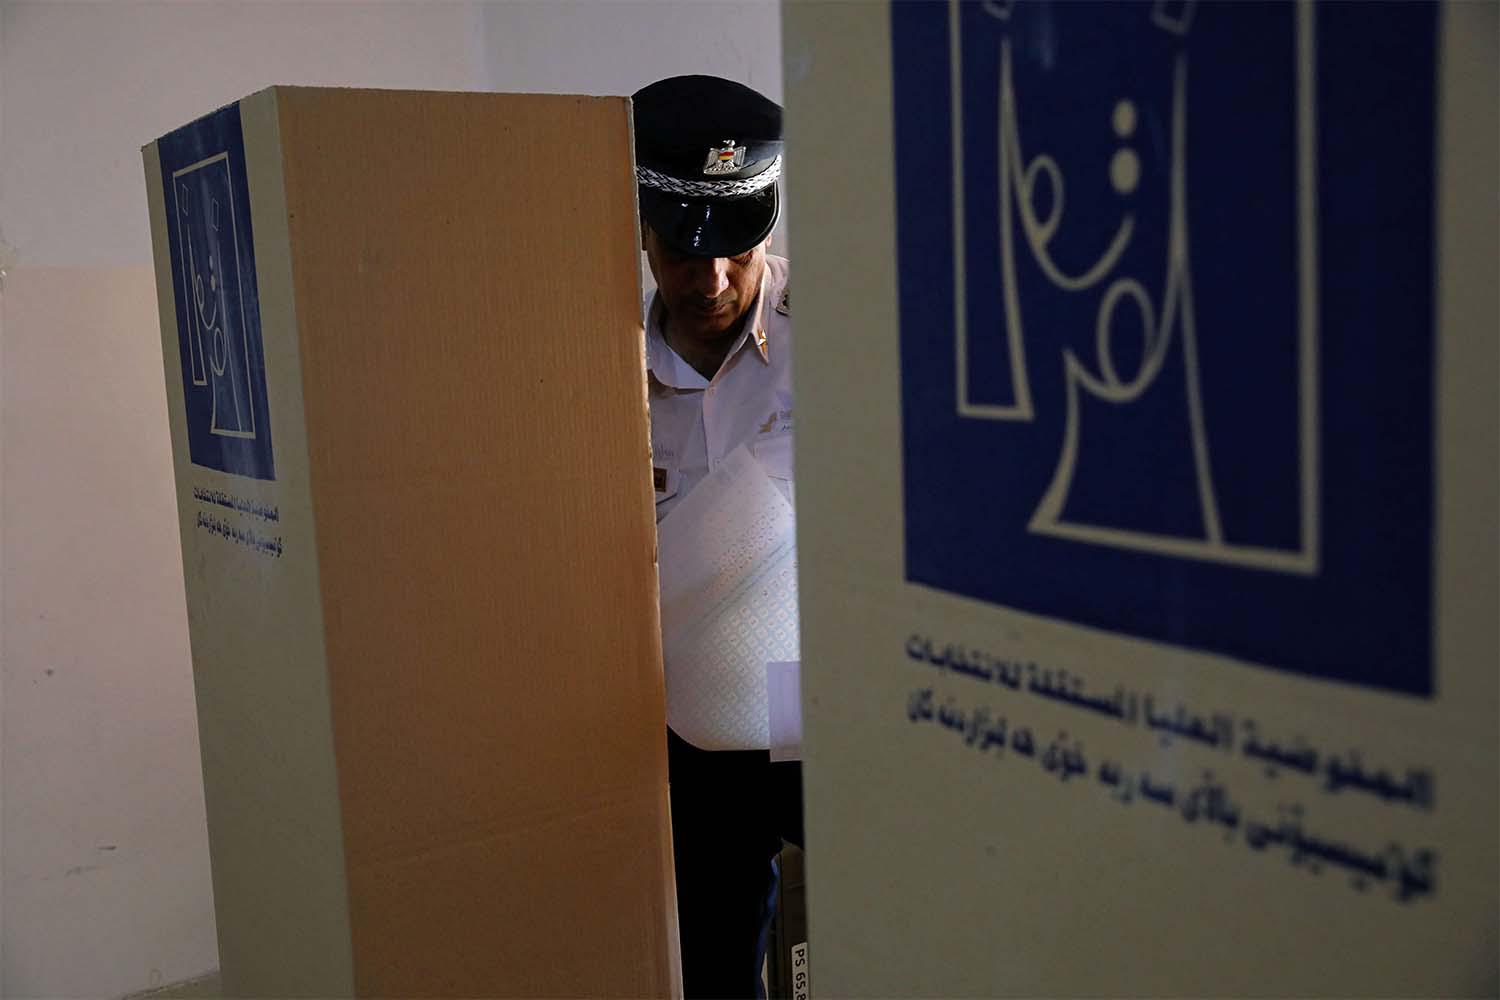 More than 1.5 million security personnel are eligible to vote